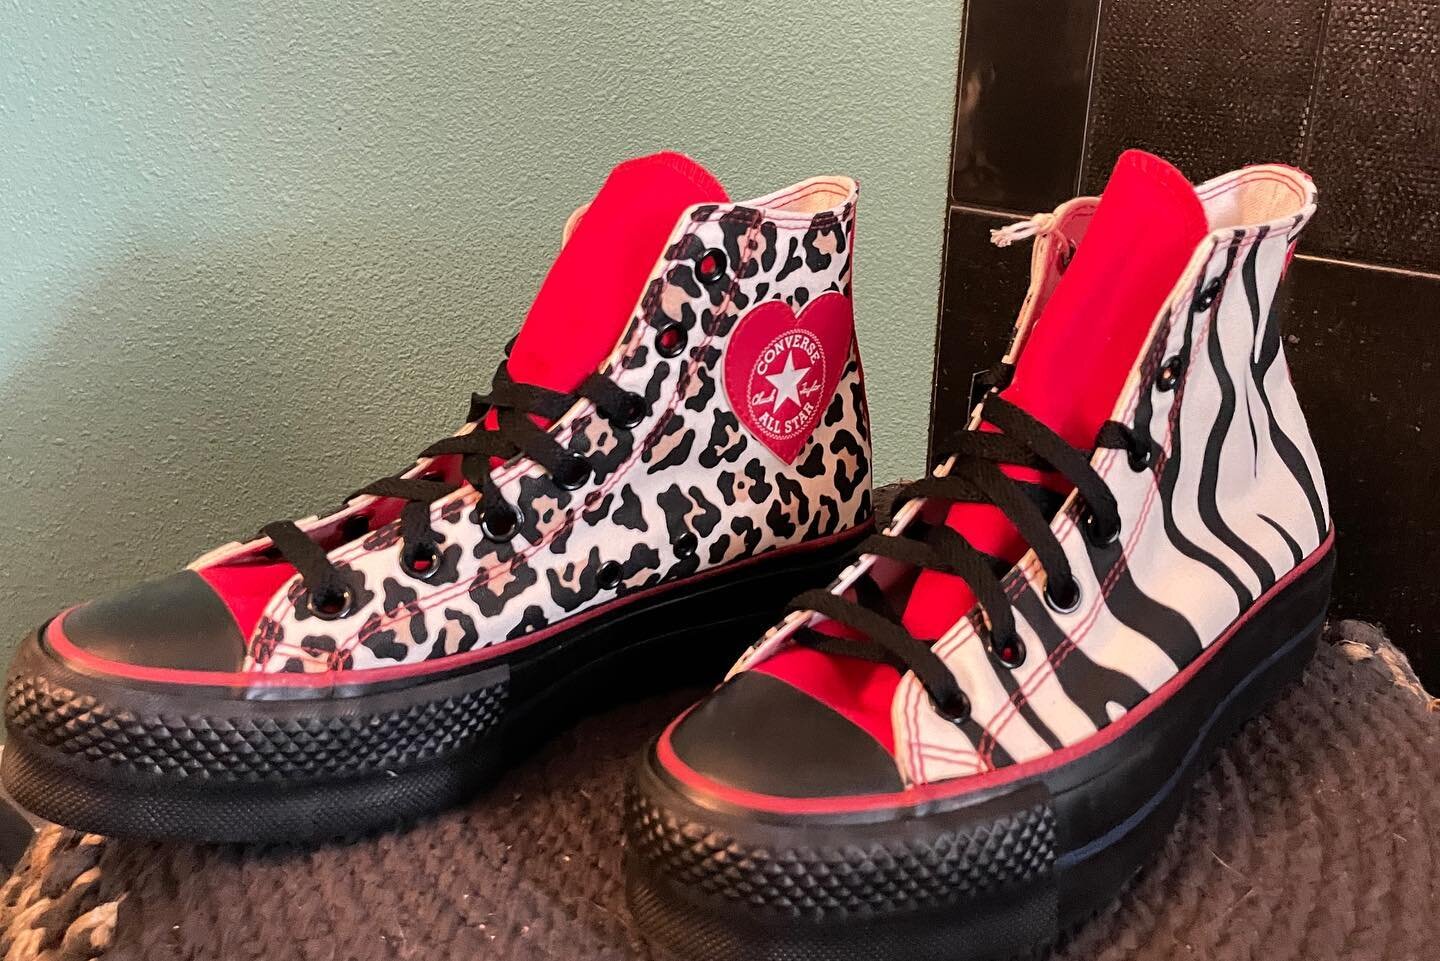 New custom shoes from Converse just arrived!  Unfortunately, I can&rsquo;t wear them for a few months until my foot fully heals.  What do you think about these????

@converse @converse_style #customshoes. #mydesign #portlanddesigner #pdxdesign